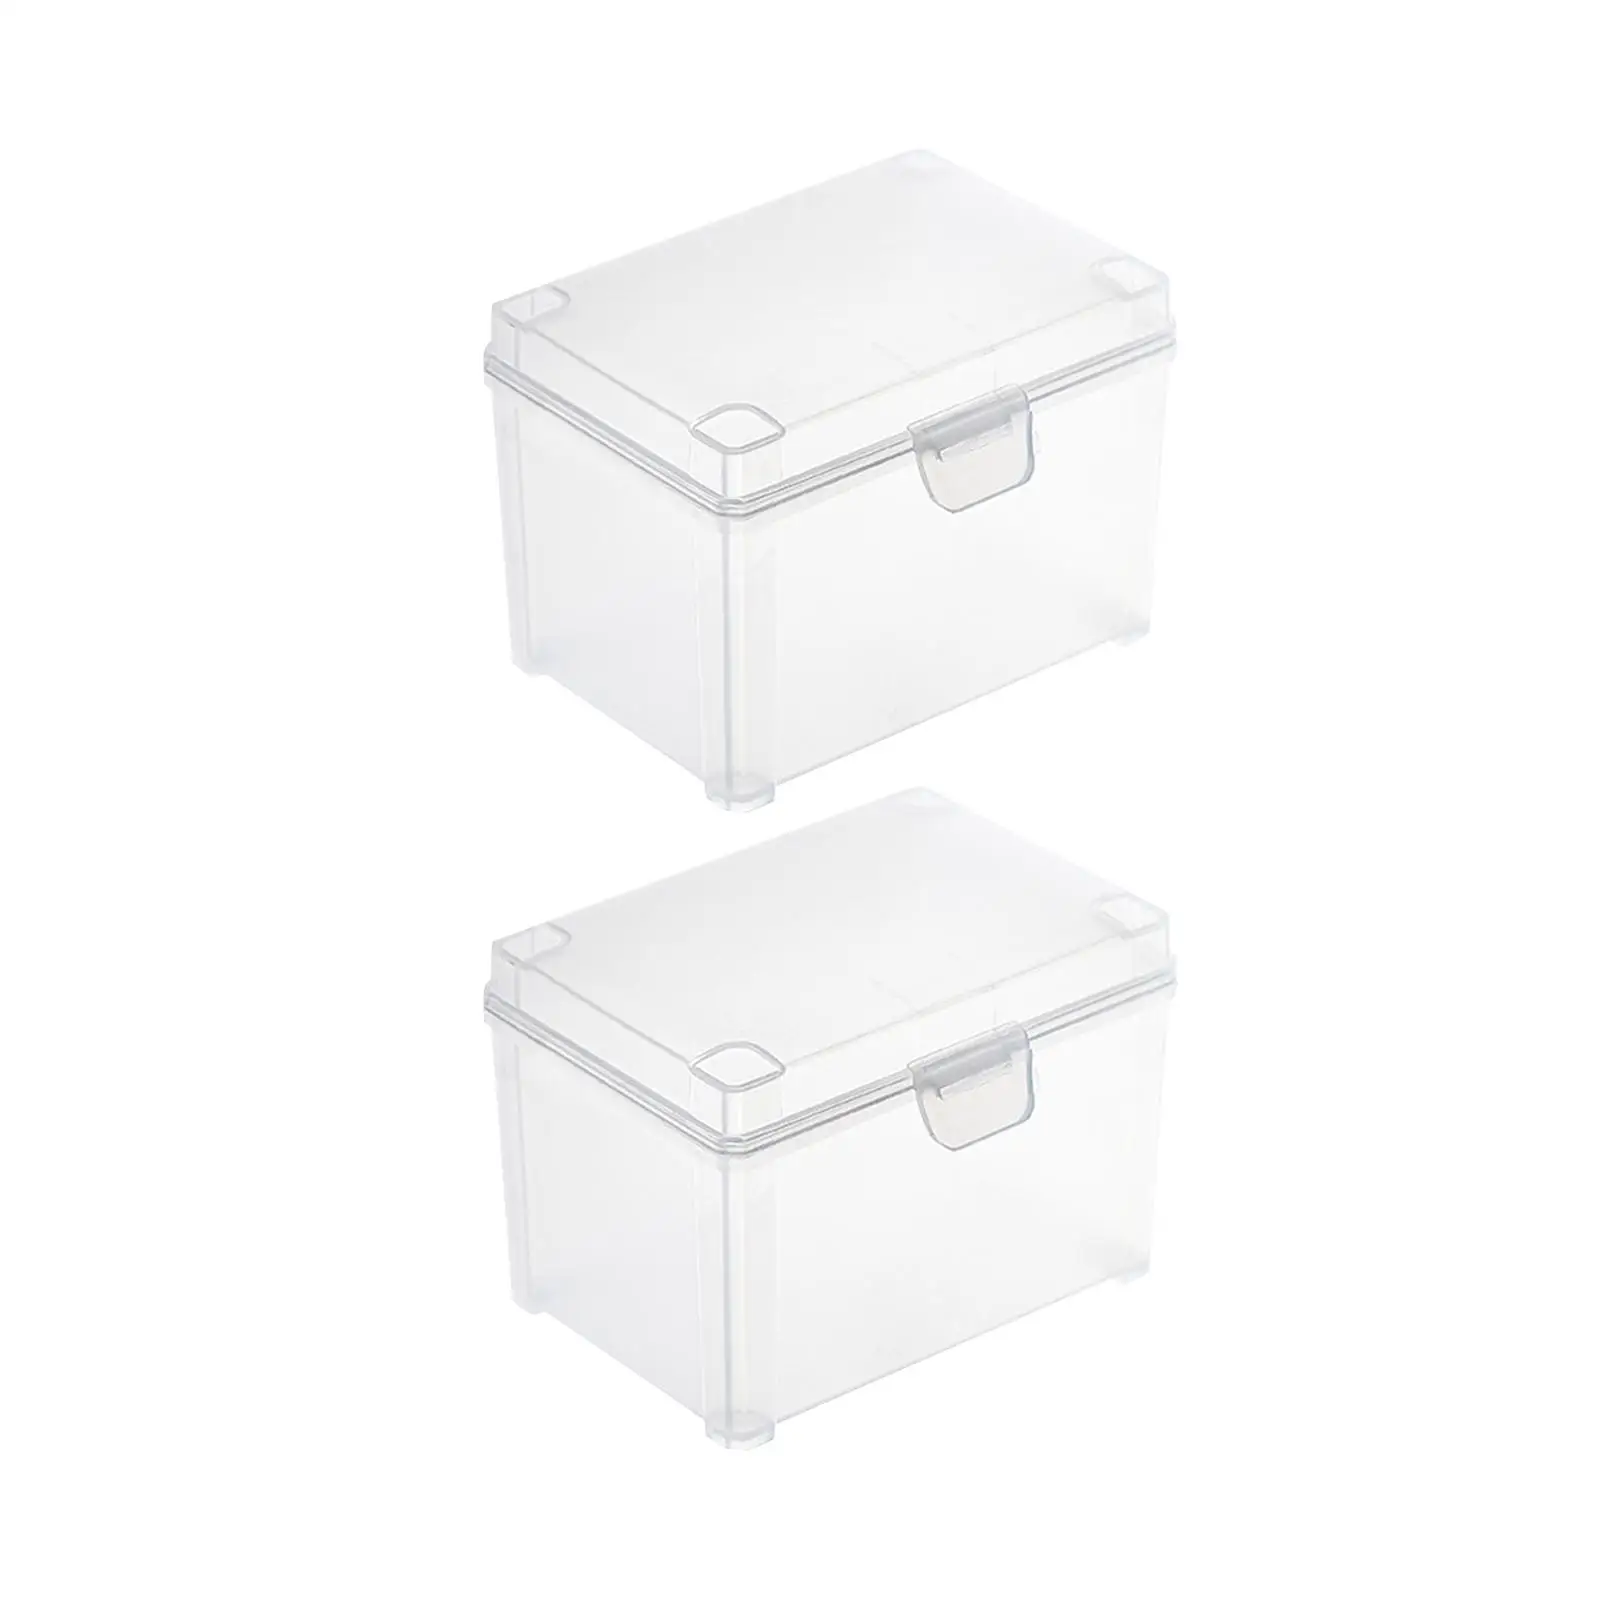 2Pcs Small Items Organizer PP 9.5x6.3x6.5cm Rectangle Cards Storage Cases for Collecting Small Items Clips Jewelry Office Home